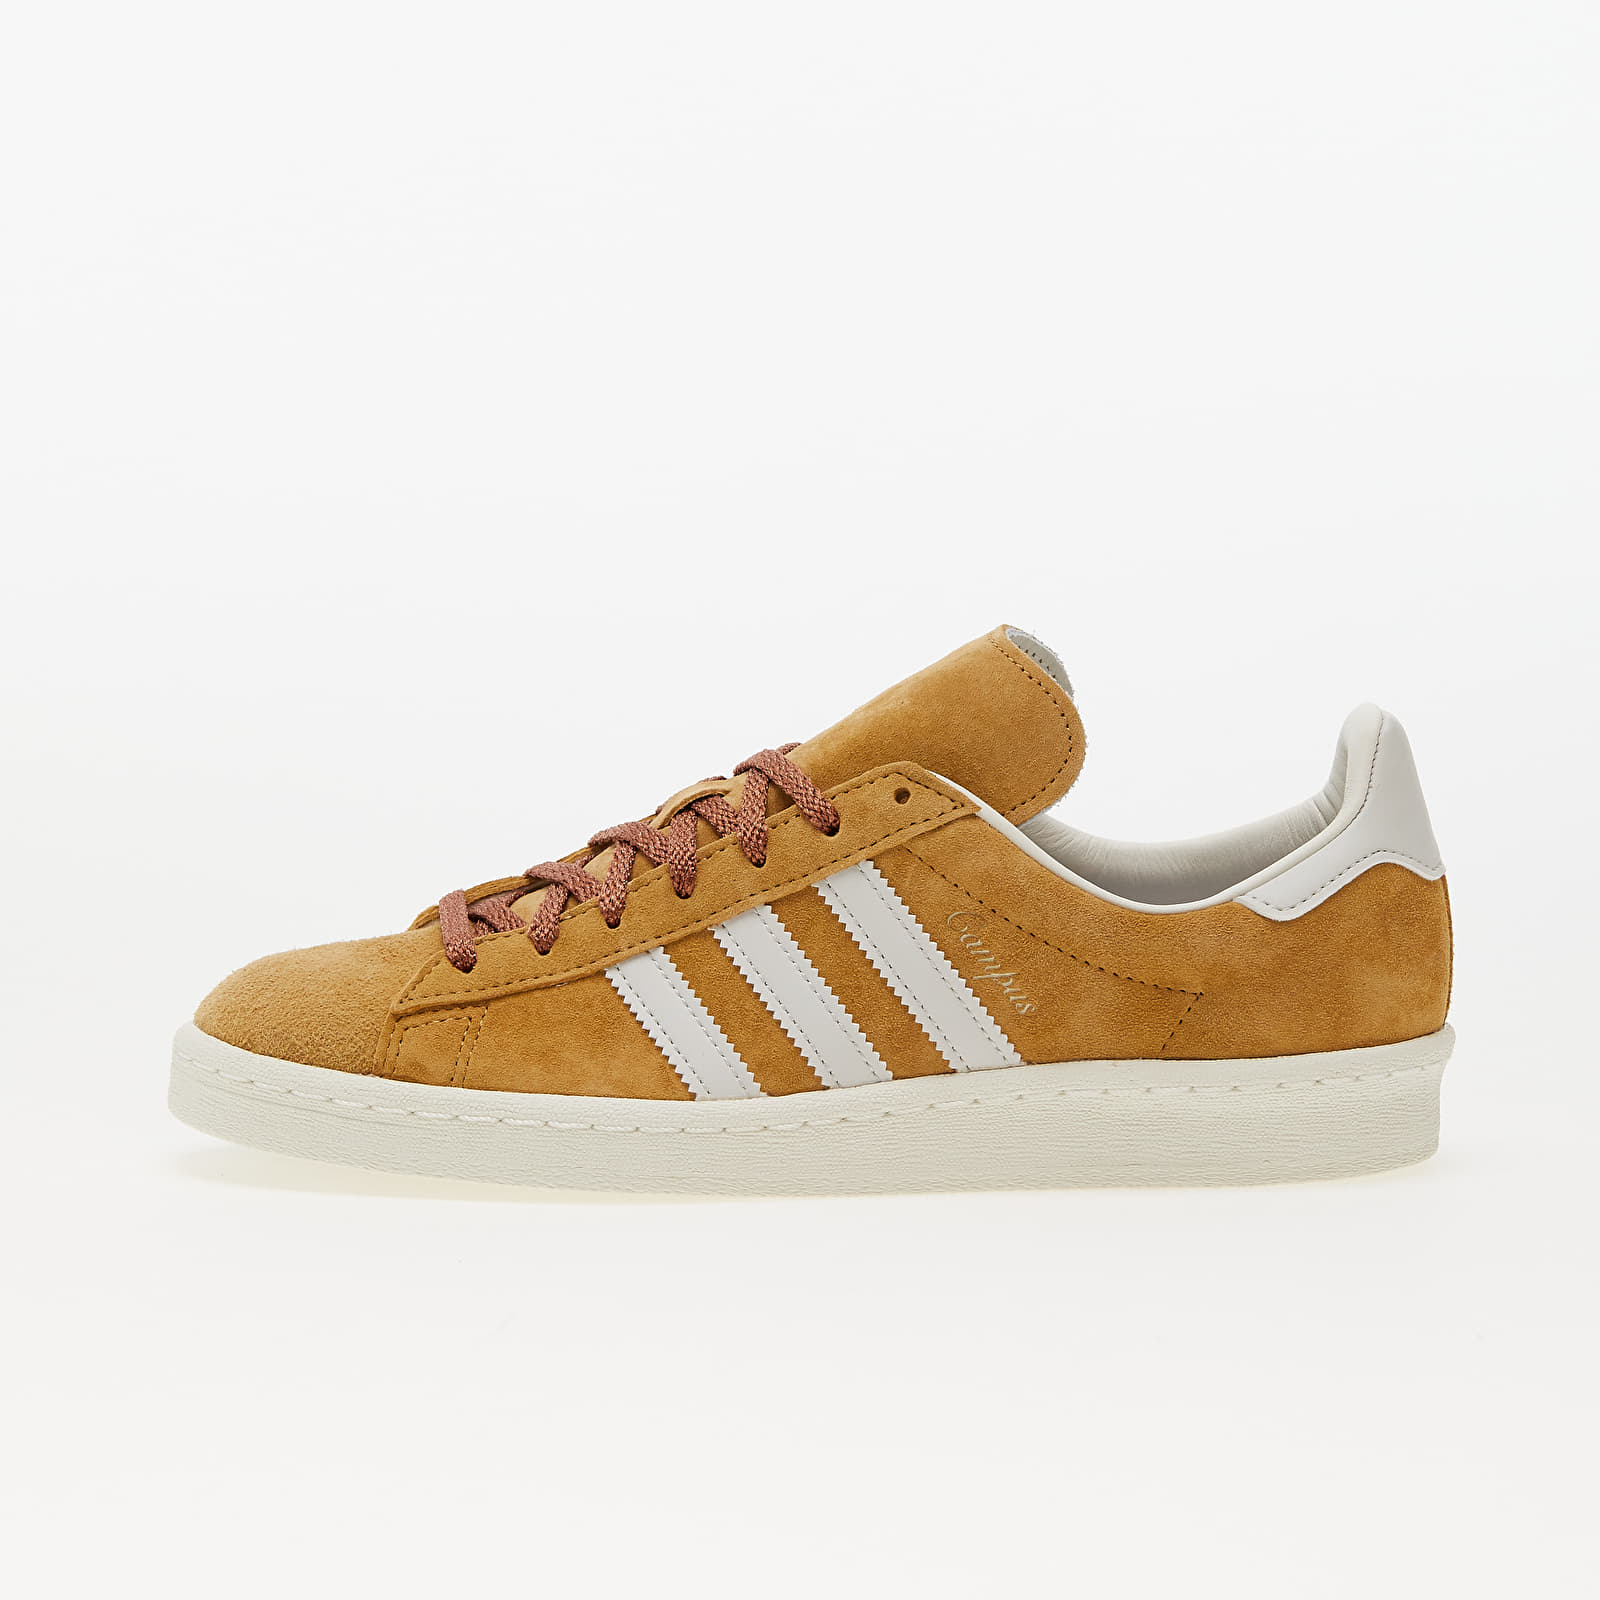 Men's shoes adidas Campus 80s Mesa/ Orb Grey/ Off White